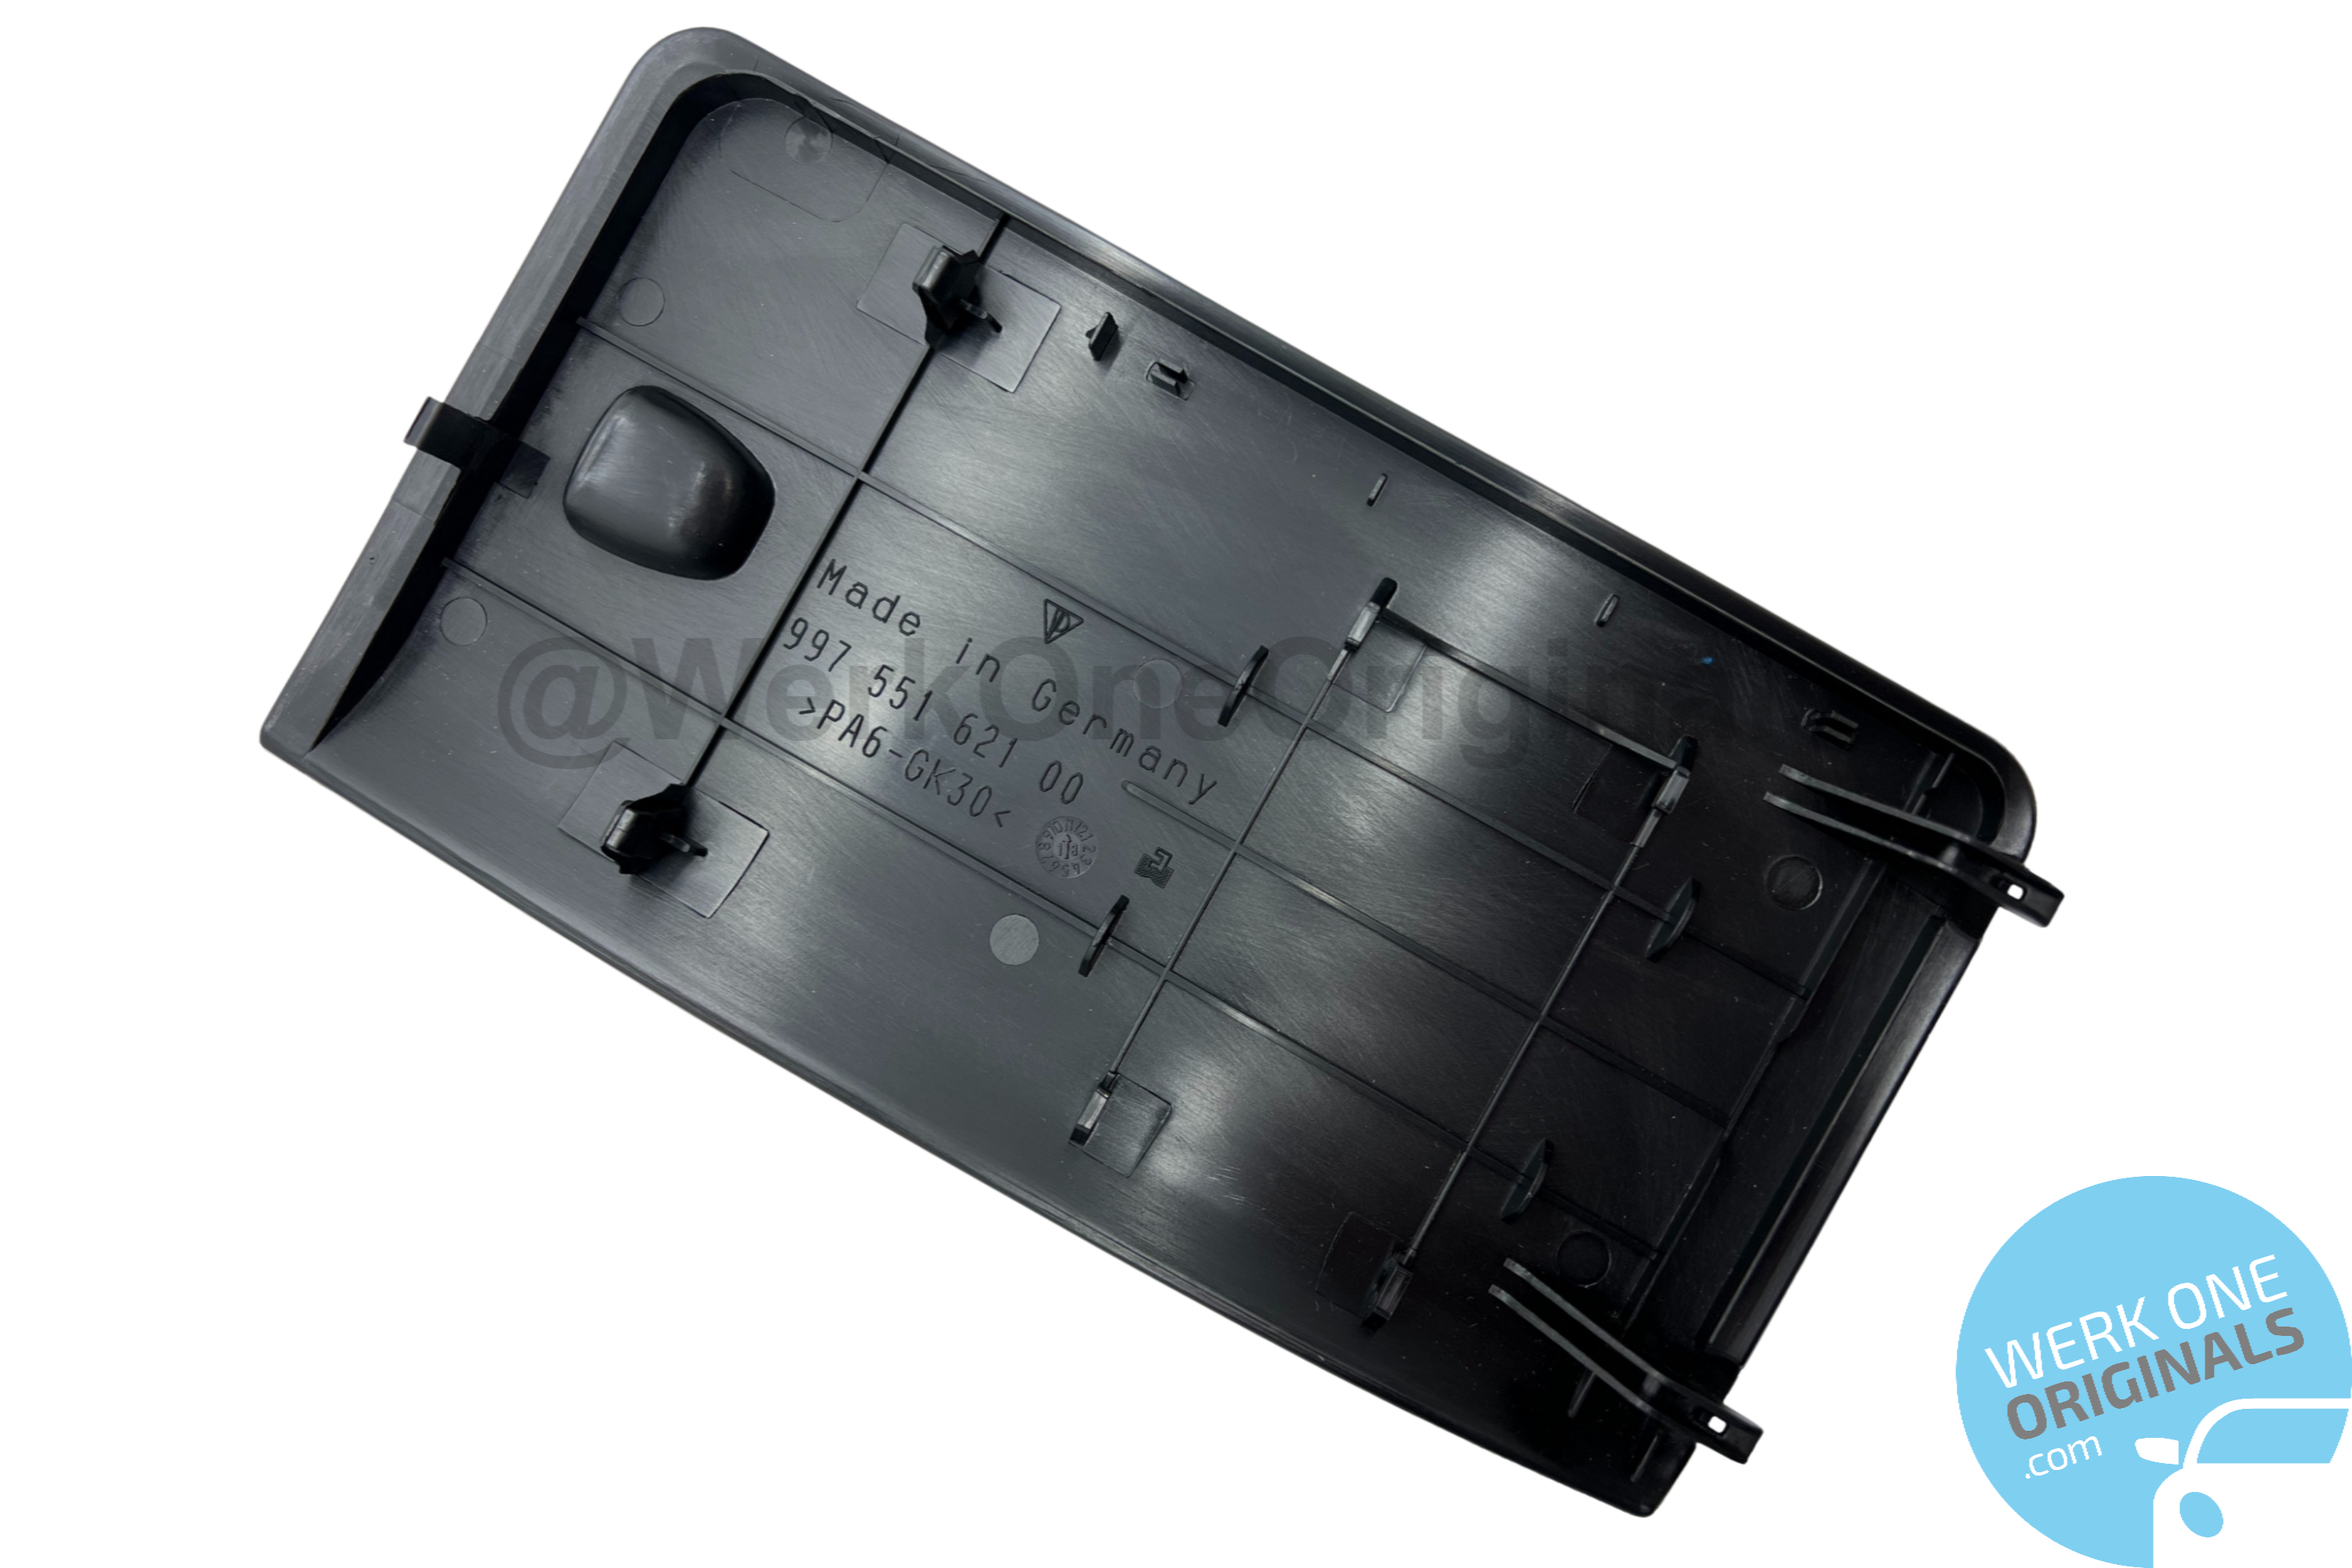 Porsche Fuse Box Lid Cover for Cayman Type 987 LHD Models